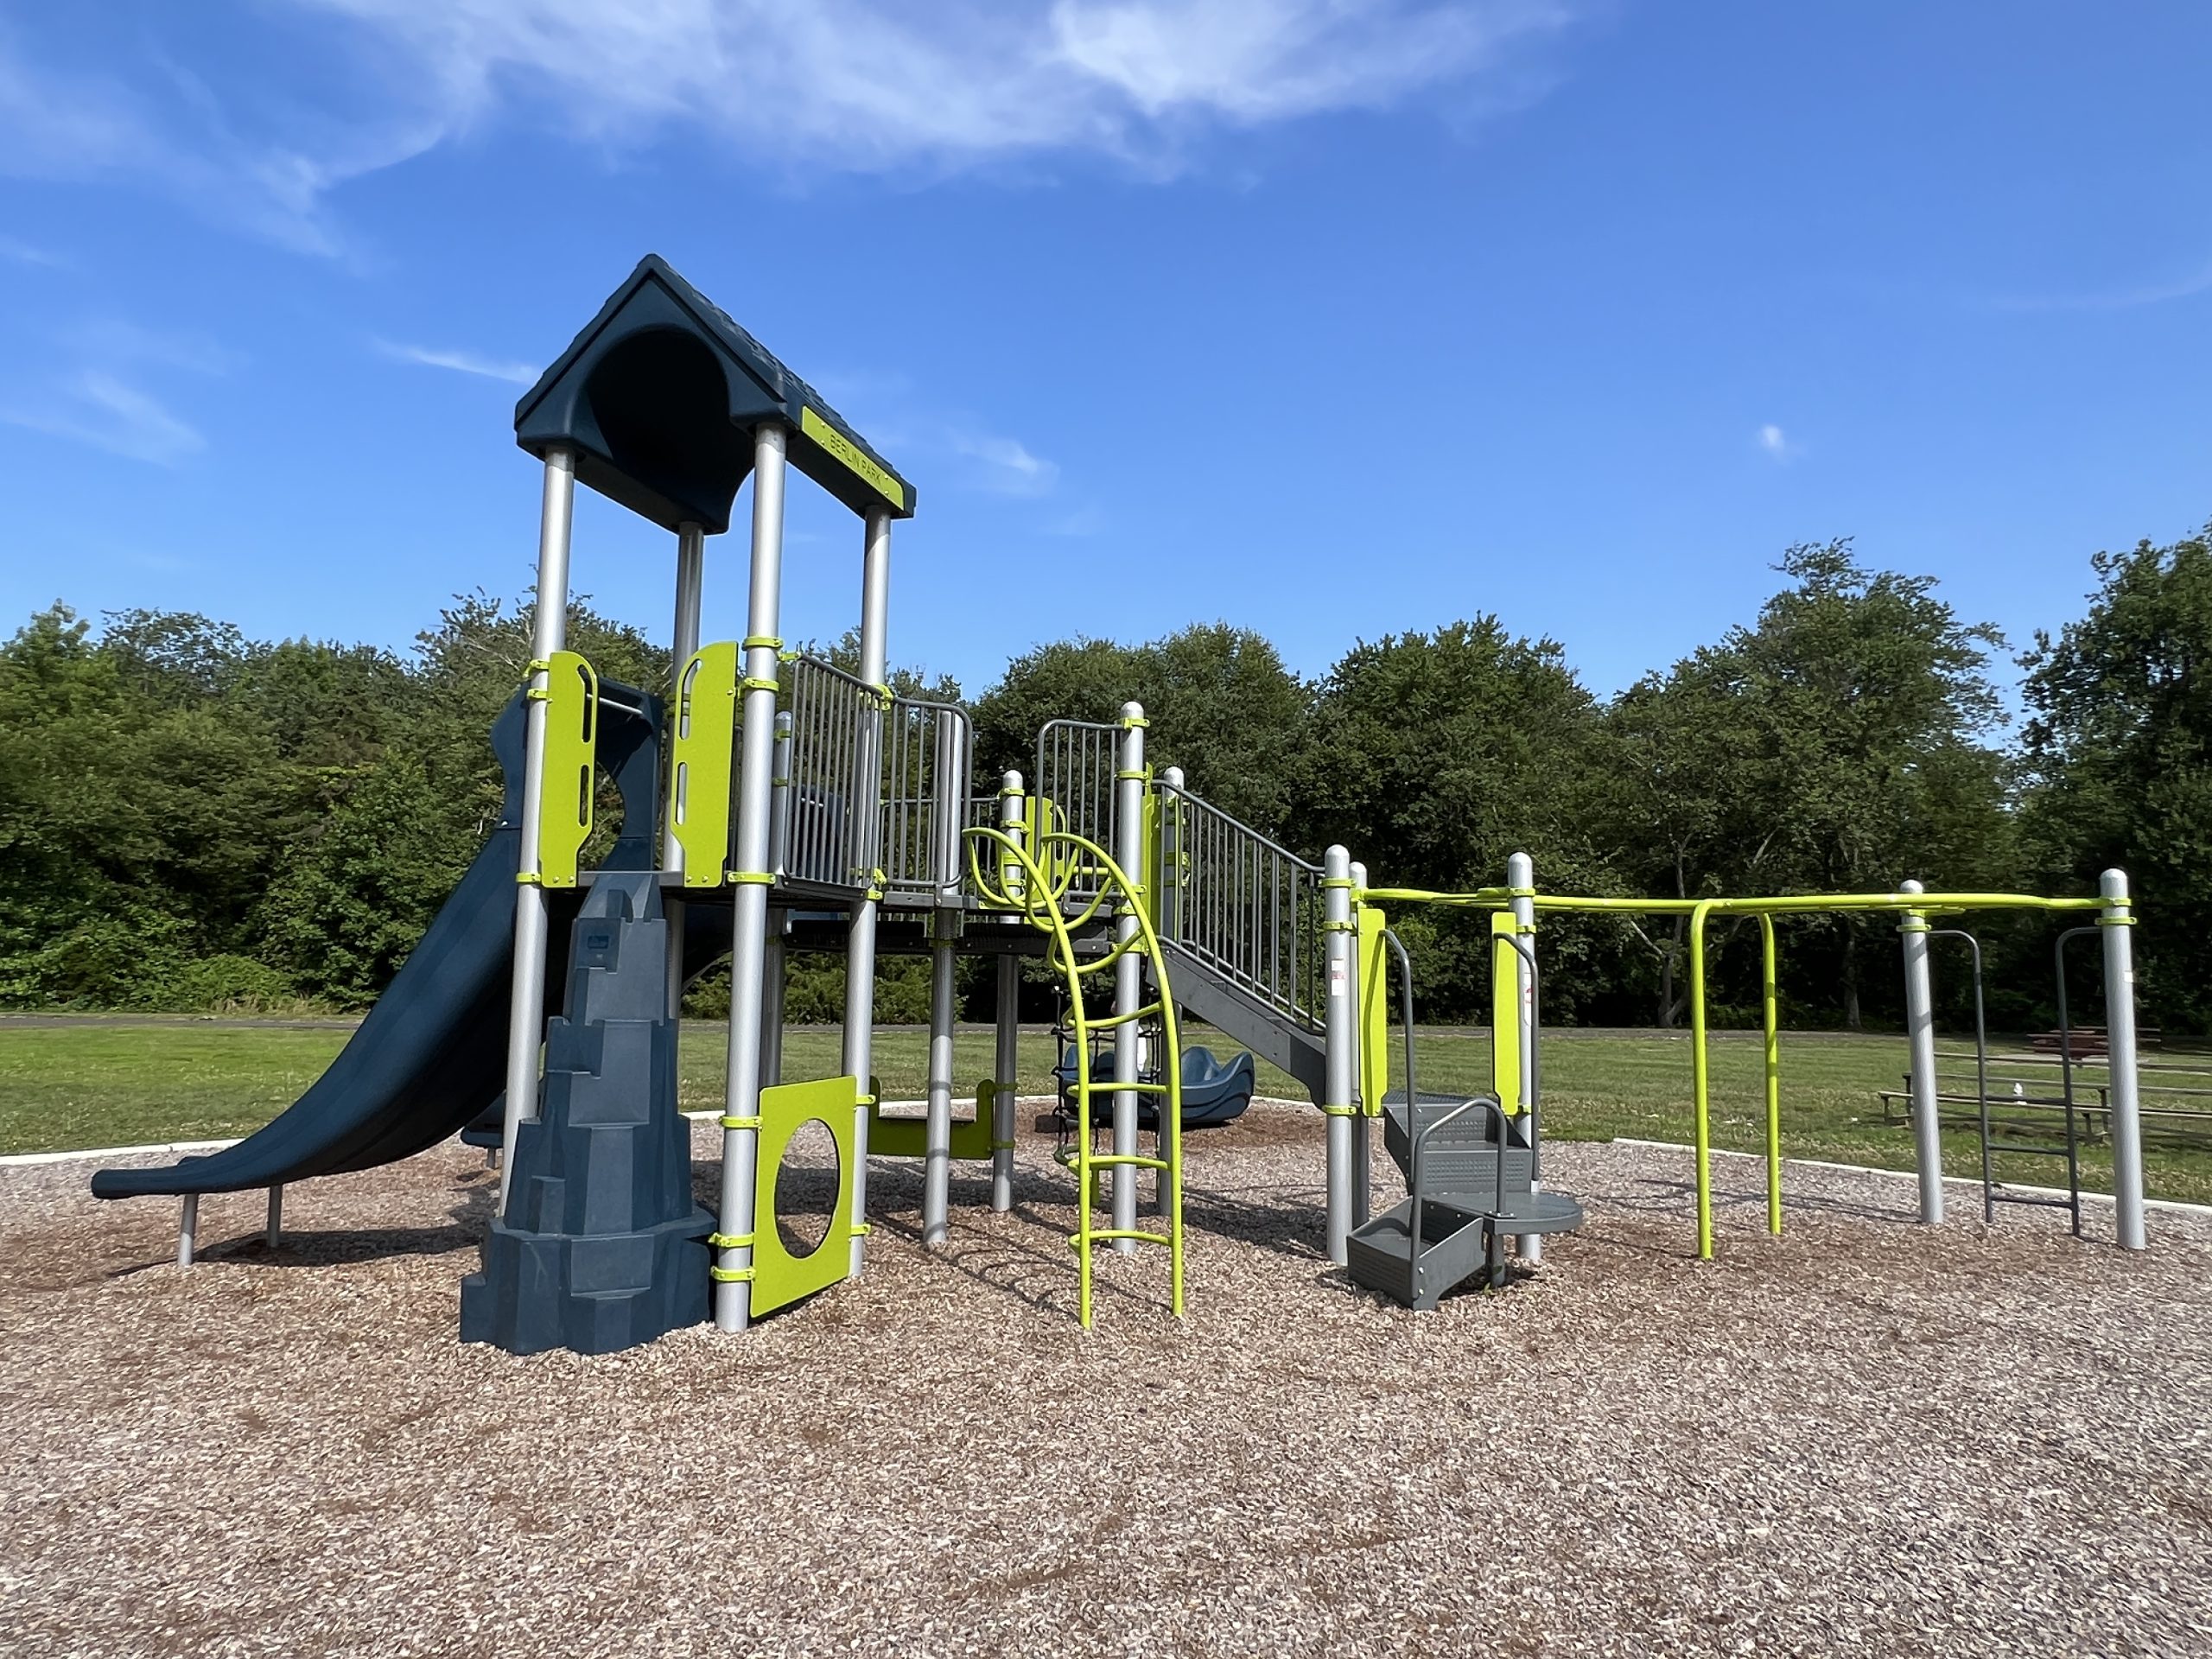 Larger Playground at Berlin Park Playgrounds in Berlin New Jersey horizontal image of main structure front